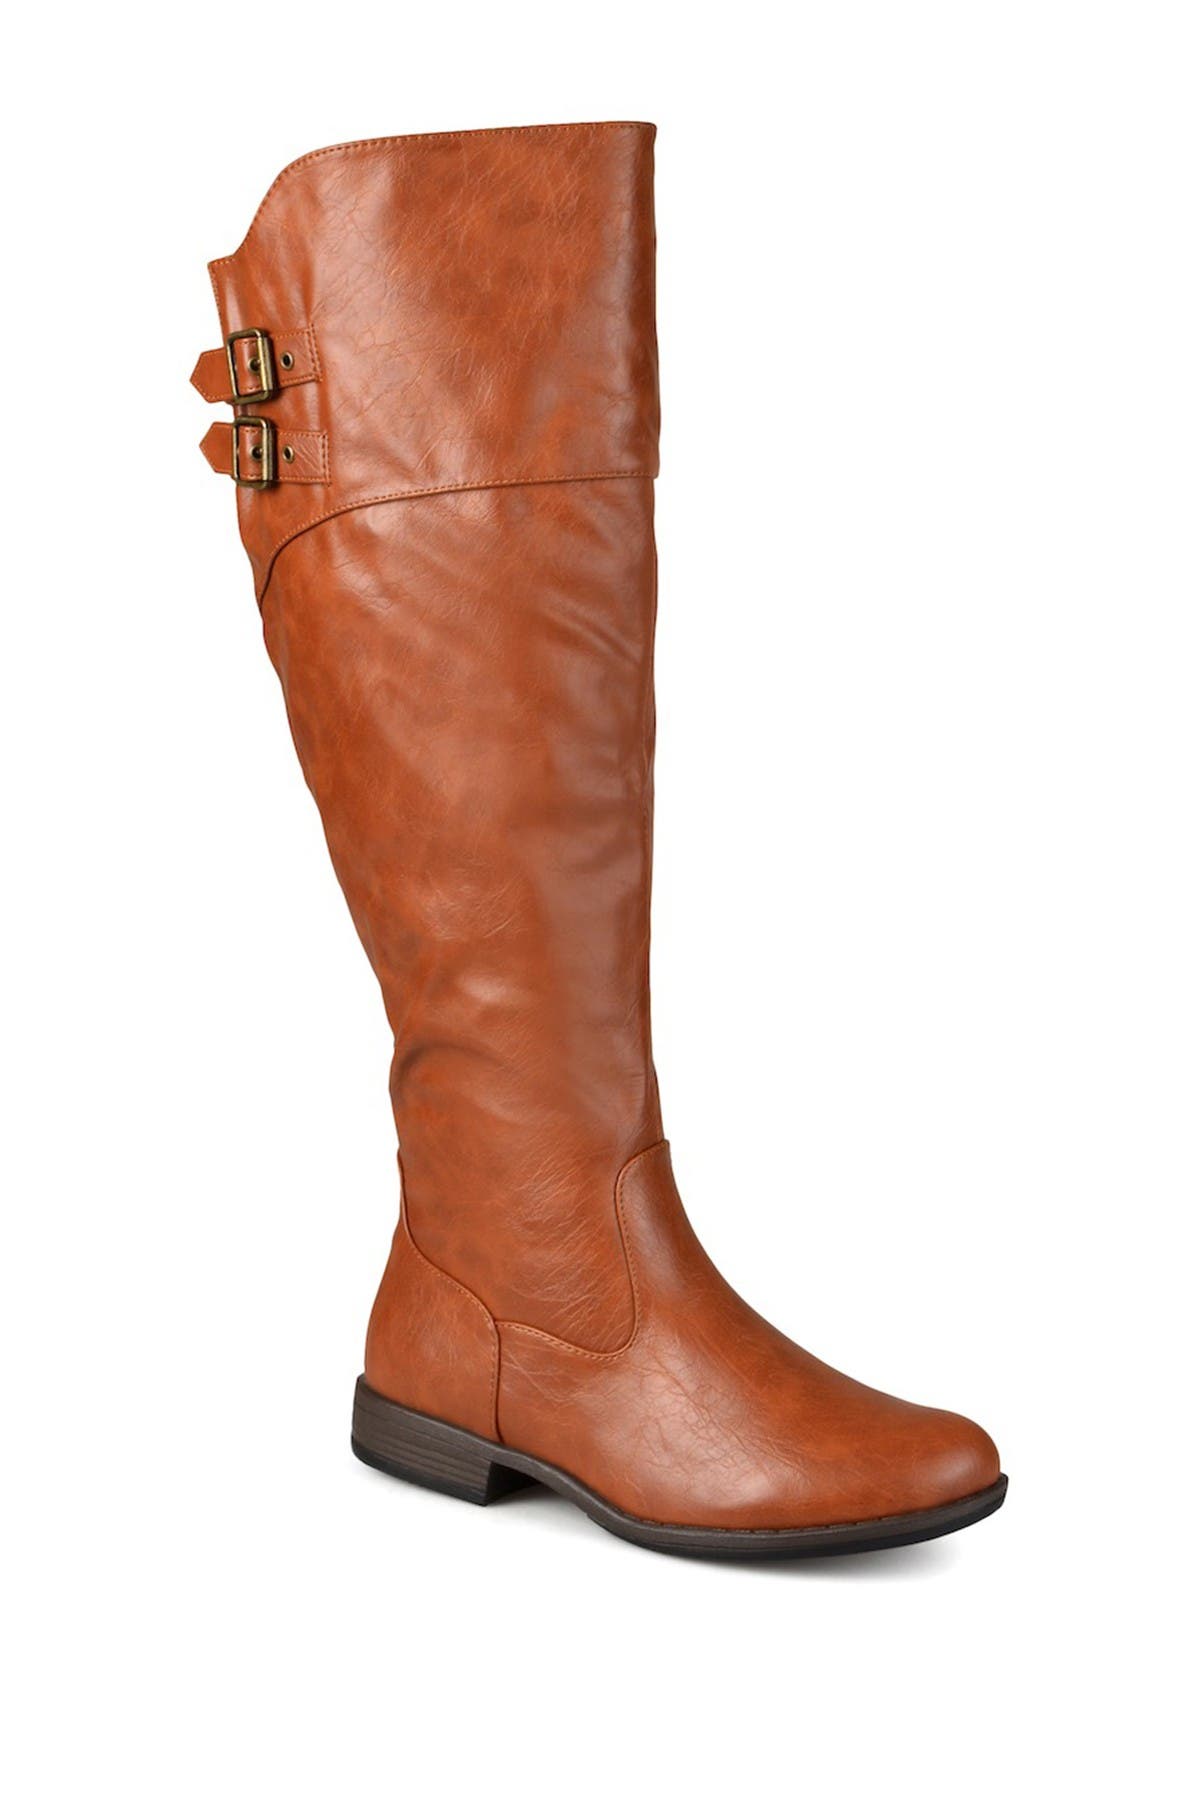 nordstrom rack riding boots